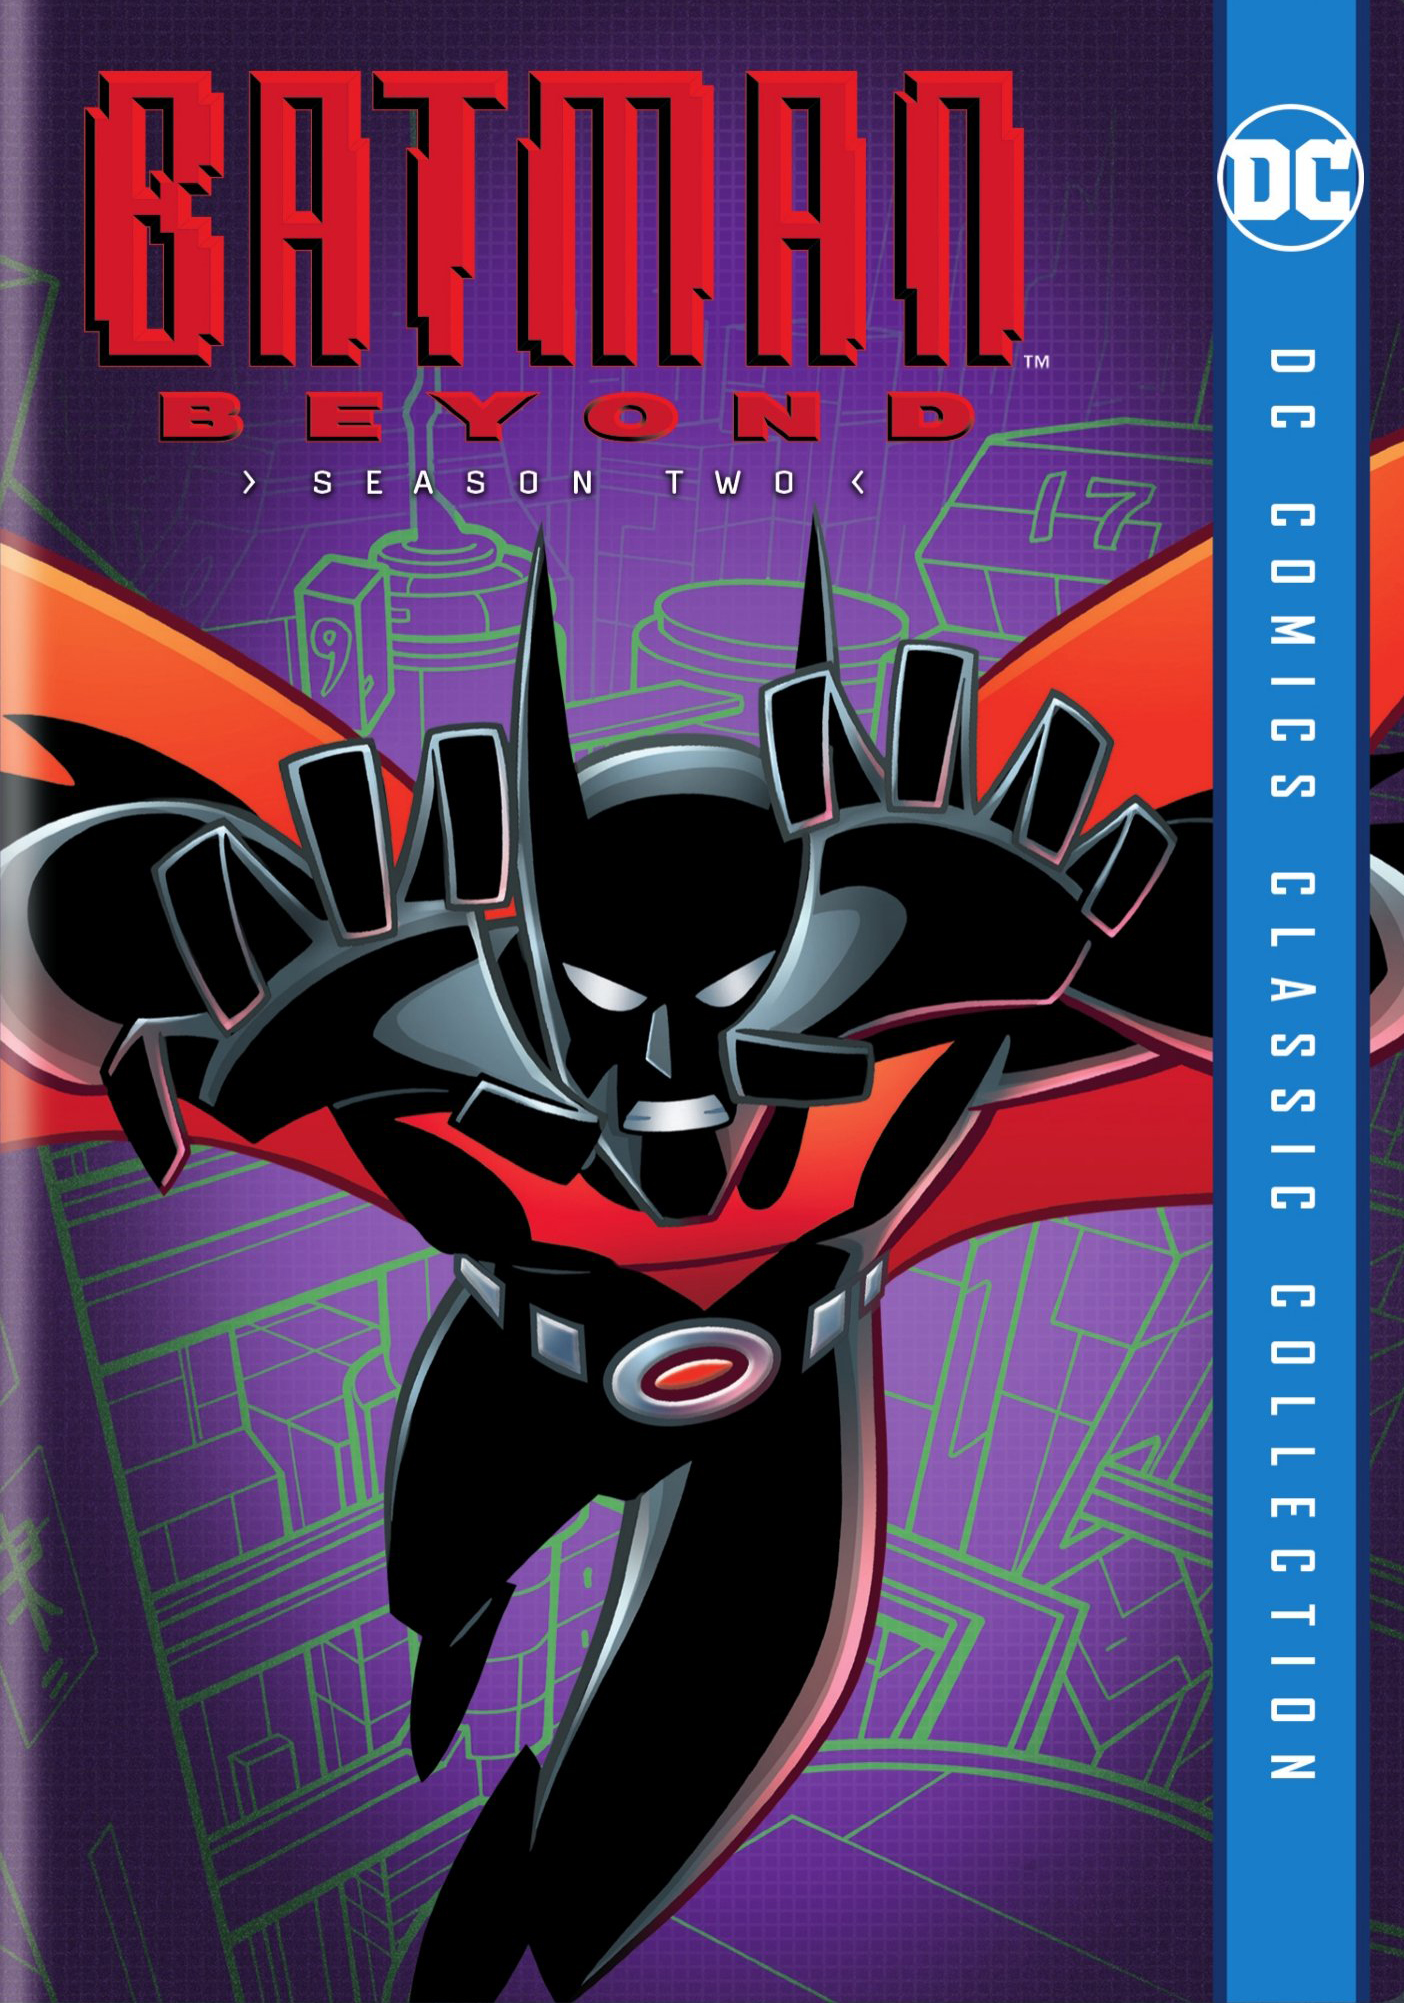 BATMAN BEYOND Complete Animated TV Series & MOVIE Collection DVD